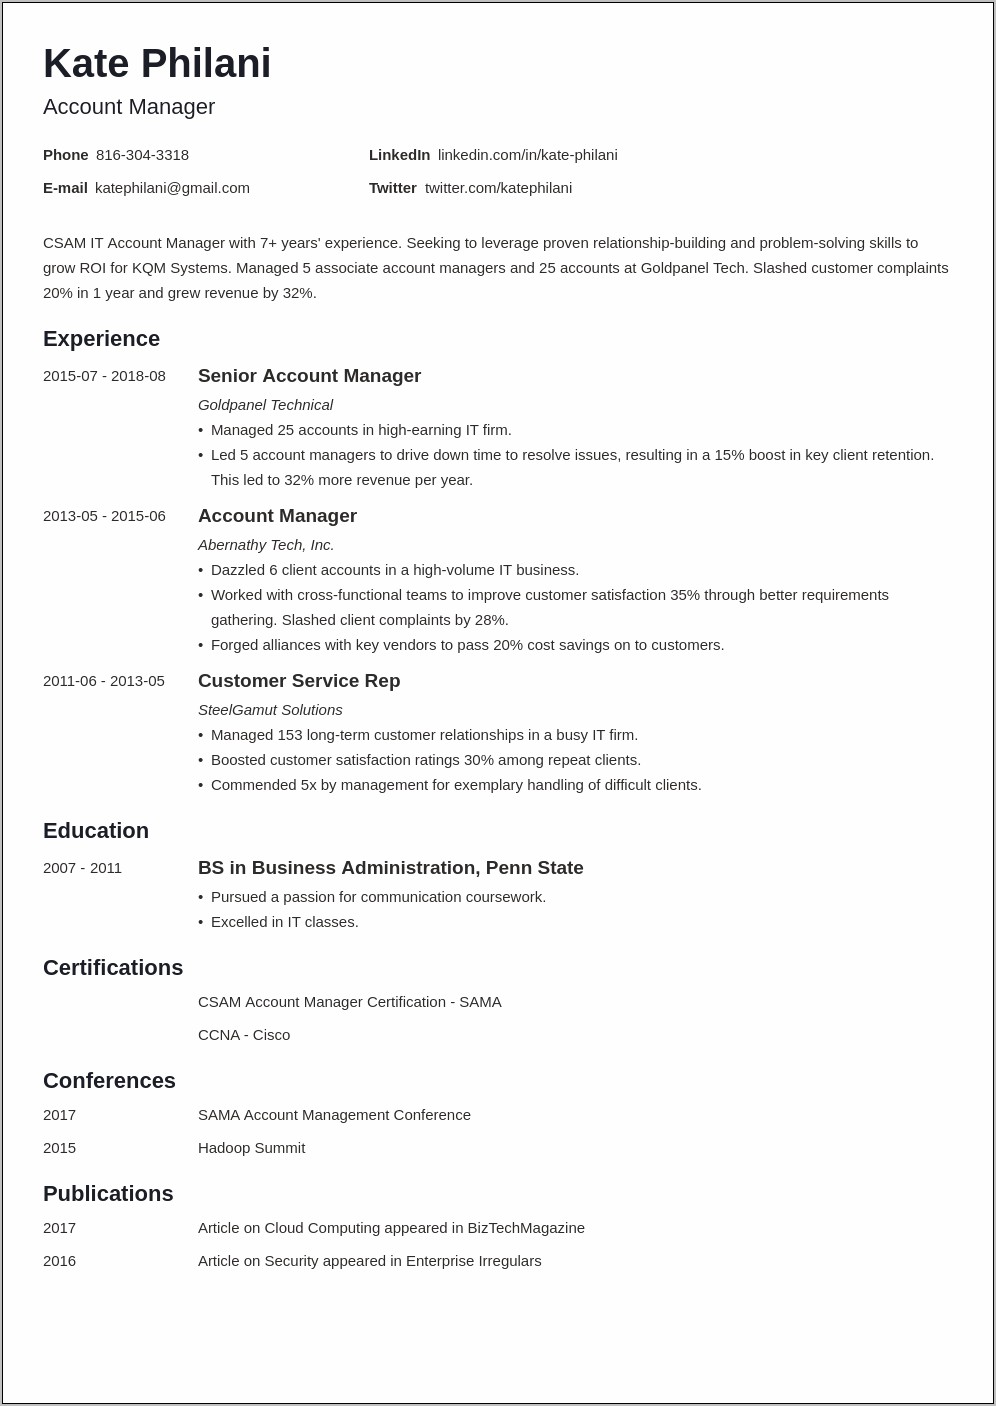 Professional Resume Summary Examples For Account Manager